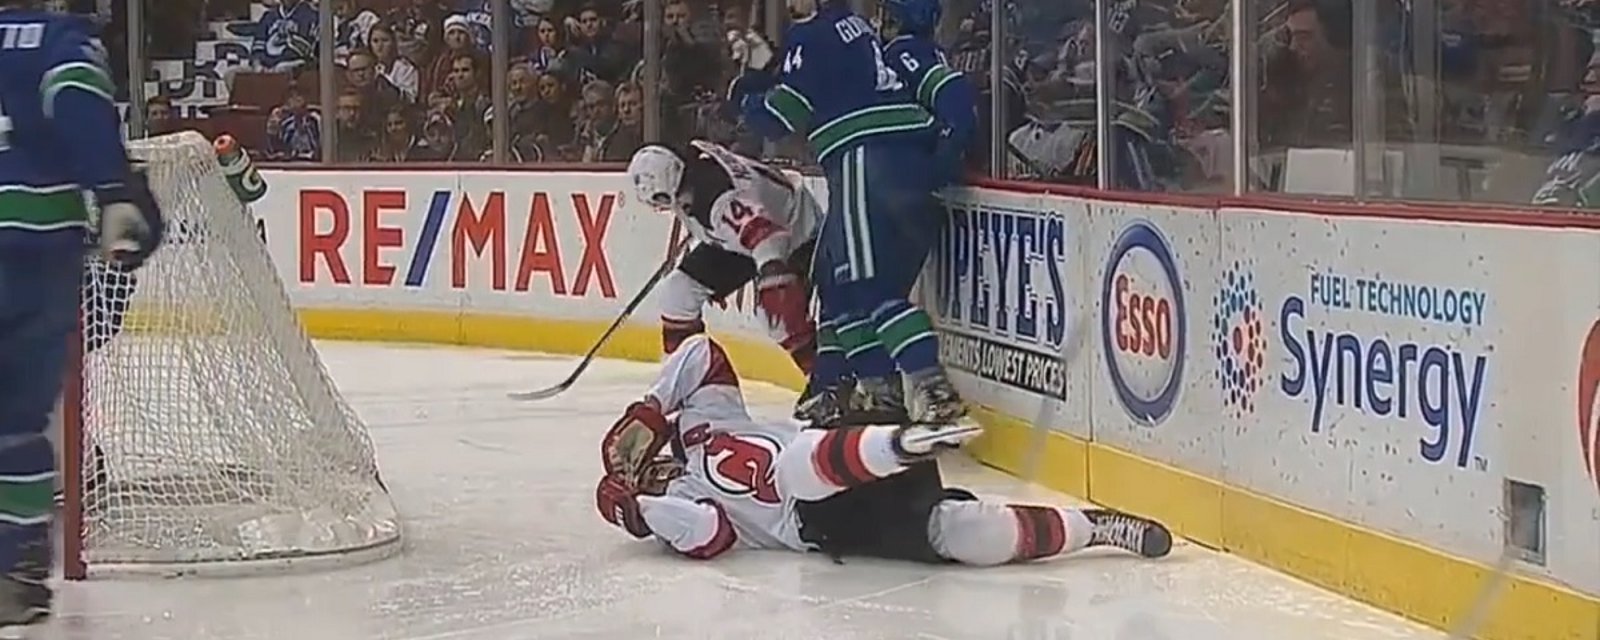 Breaking: NHL veteran leaves the game after sickening, head-first, crash into boards.